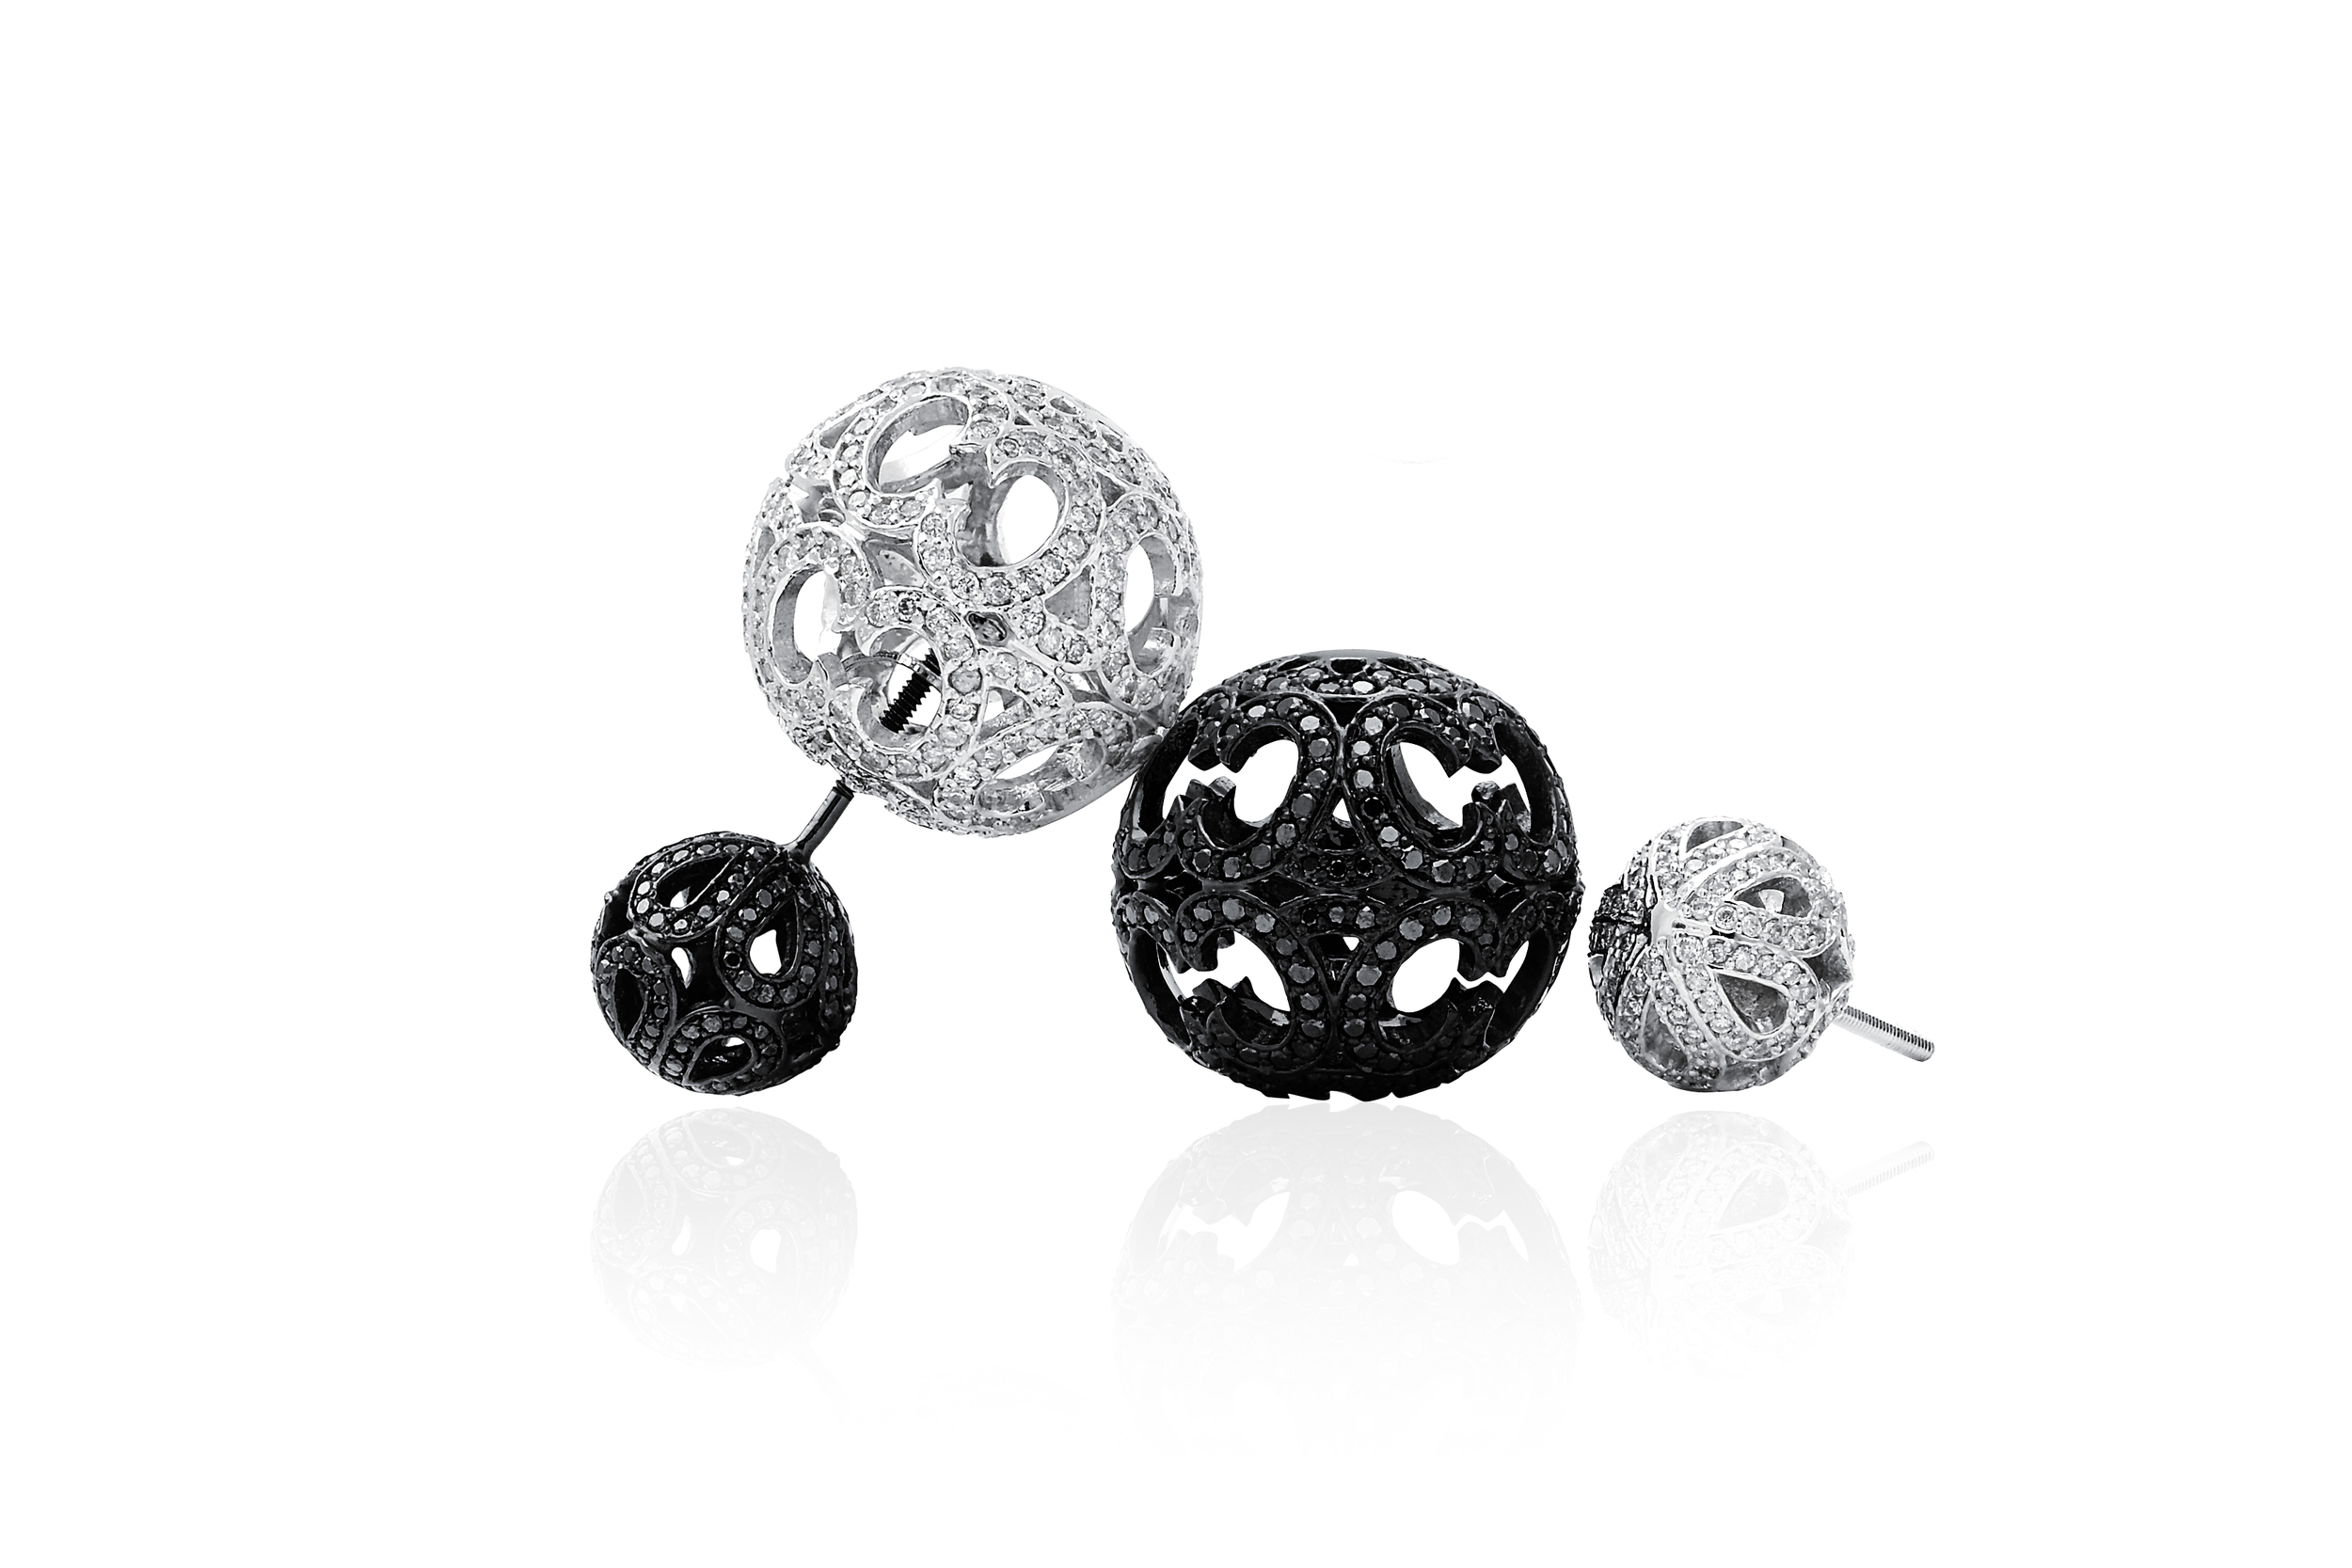  Also brand new from "Entwined with You" – black and&nbsp;white diamond double ball earrings. 